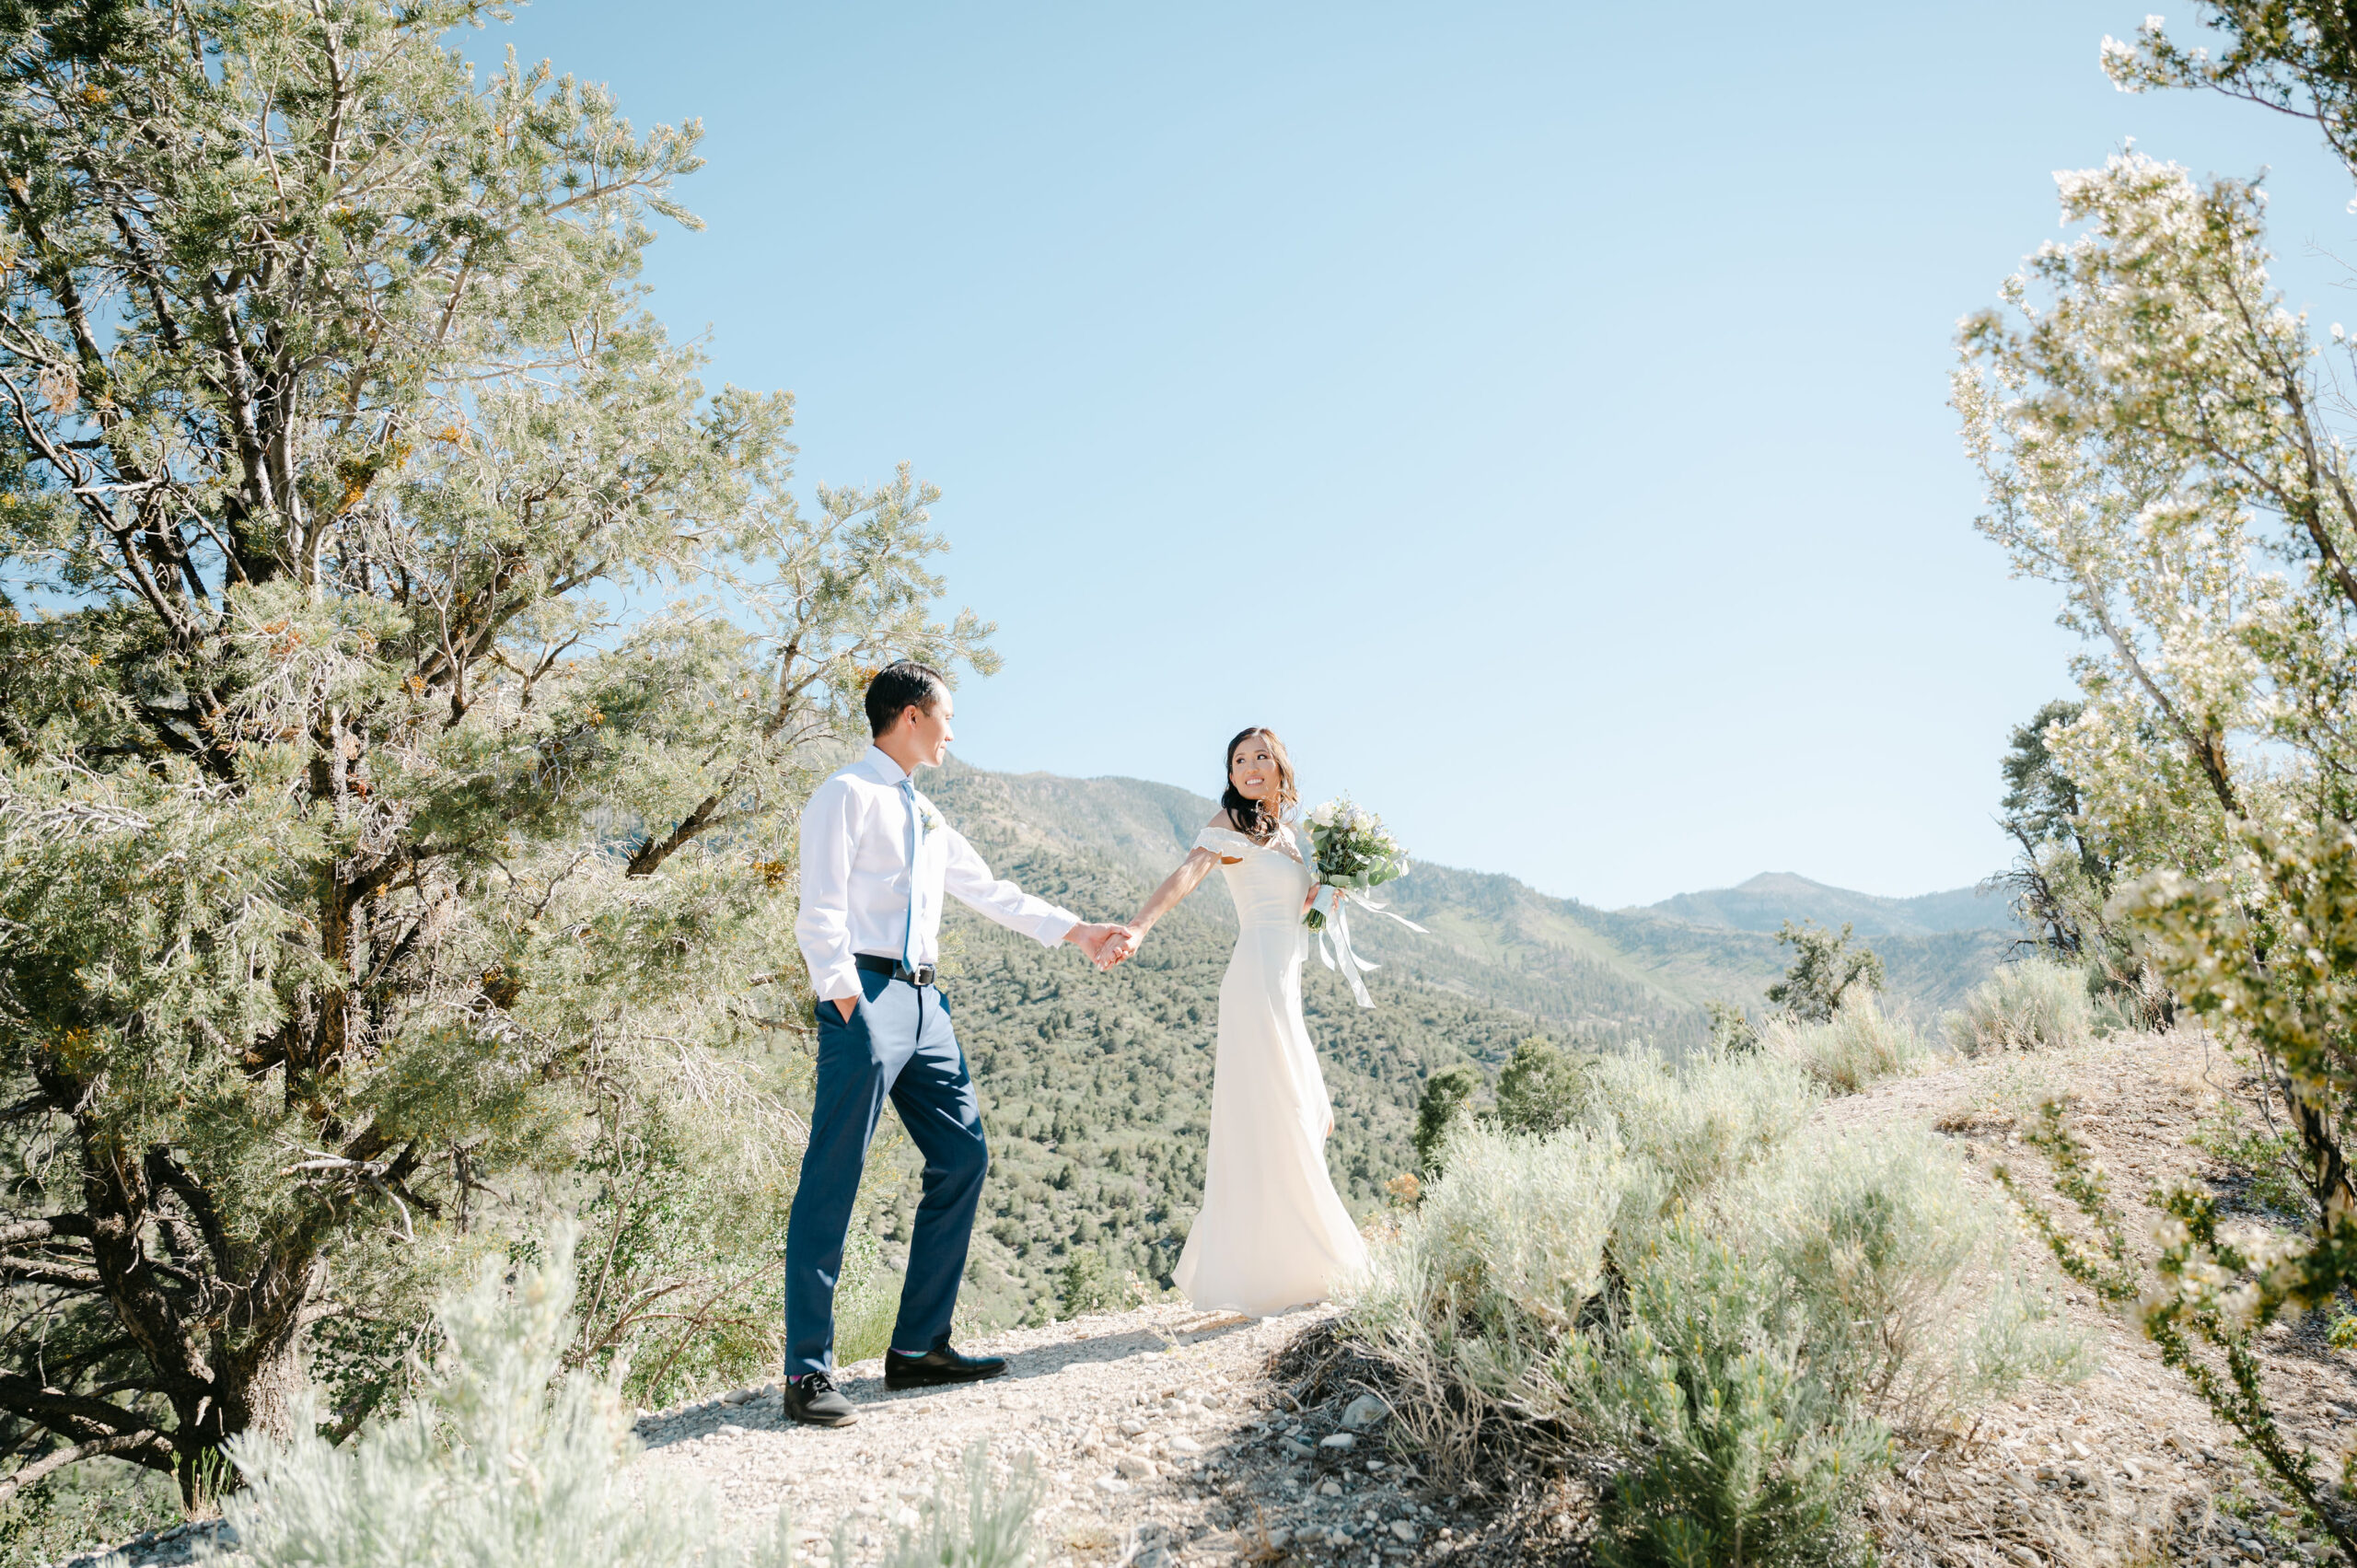 Mount Charleston Wedding: Elopement Packages and Pricing. Bride and groom holding hands during their wedding shoot.